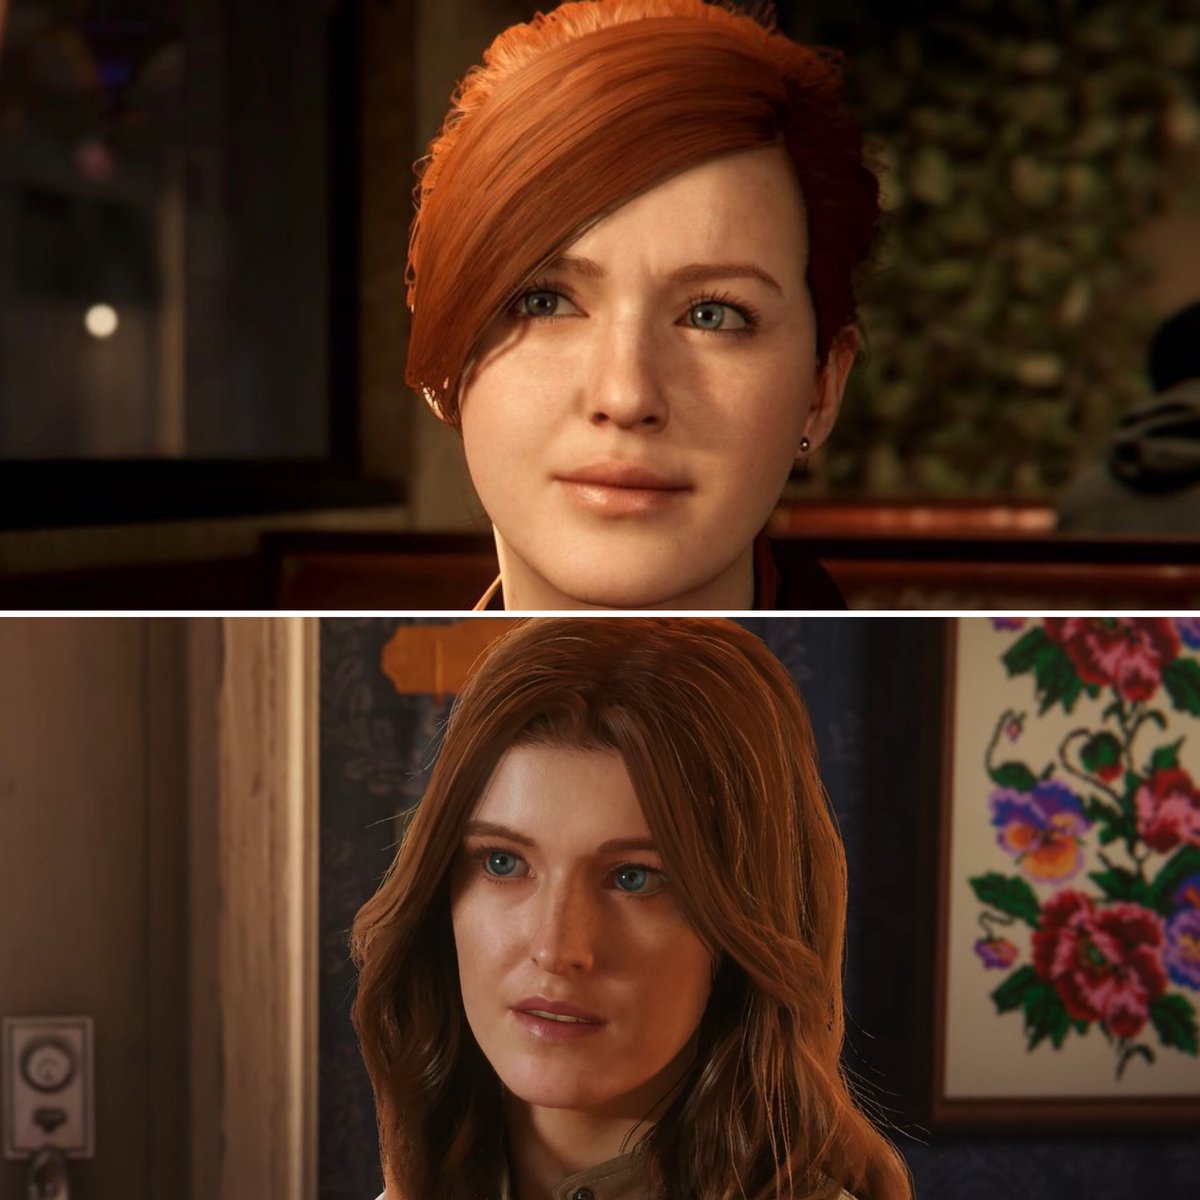 RT @DomTheBombYT: Mary Jane Evolution:

- Spider-Man 
- Spider-Man 2

Thoughts?! https://t.co/LcxuEUJXeY